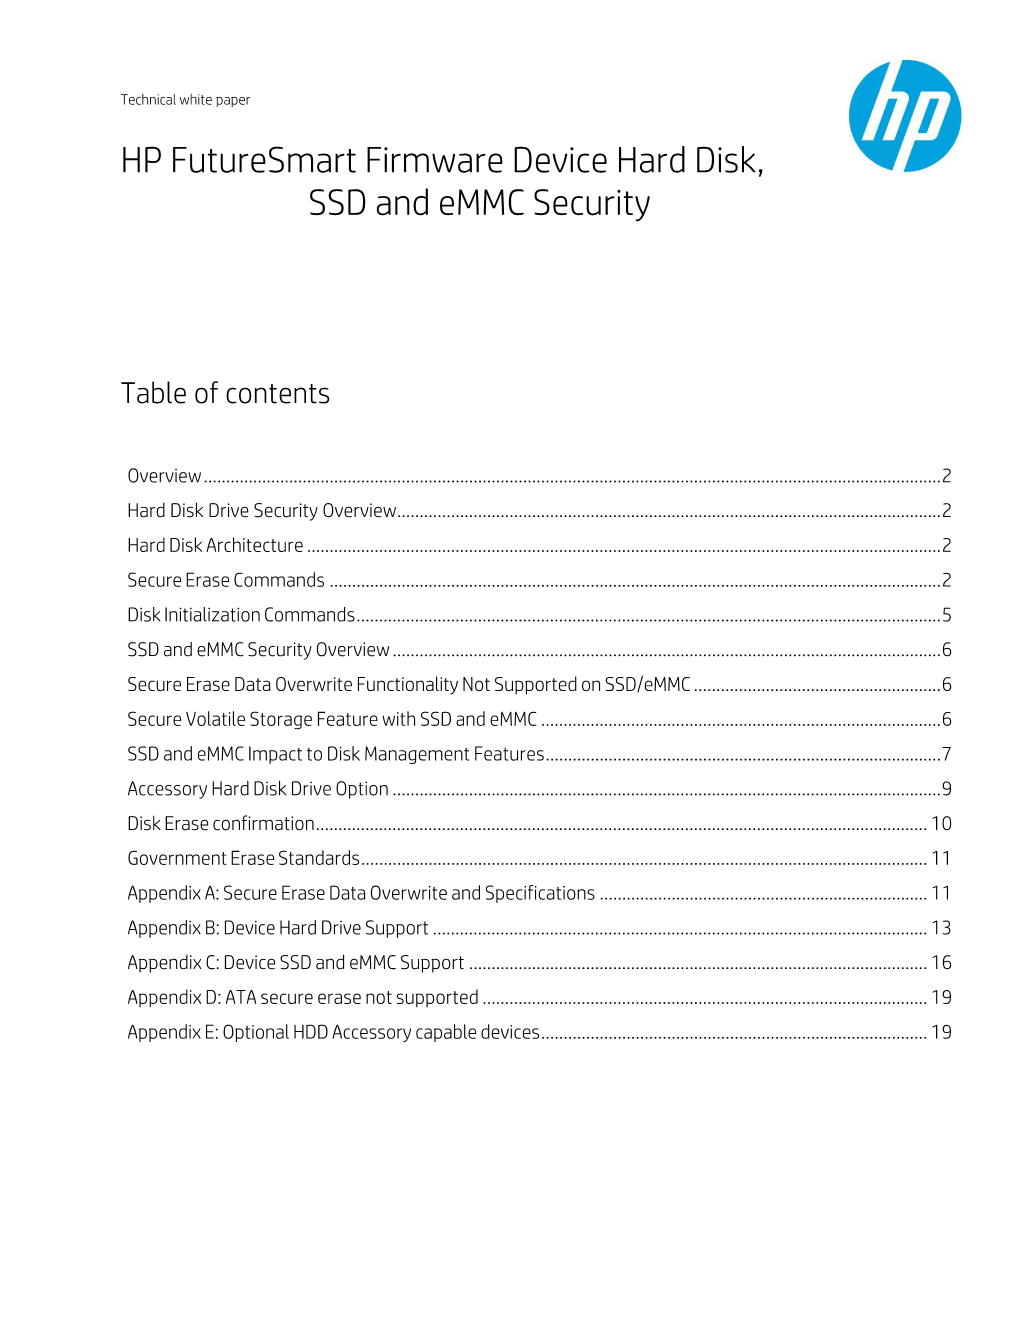 HP Futuresmart Firmware Device Hard Disk, SSD and Emmc Security